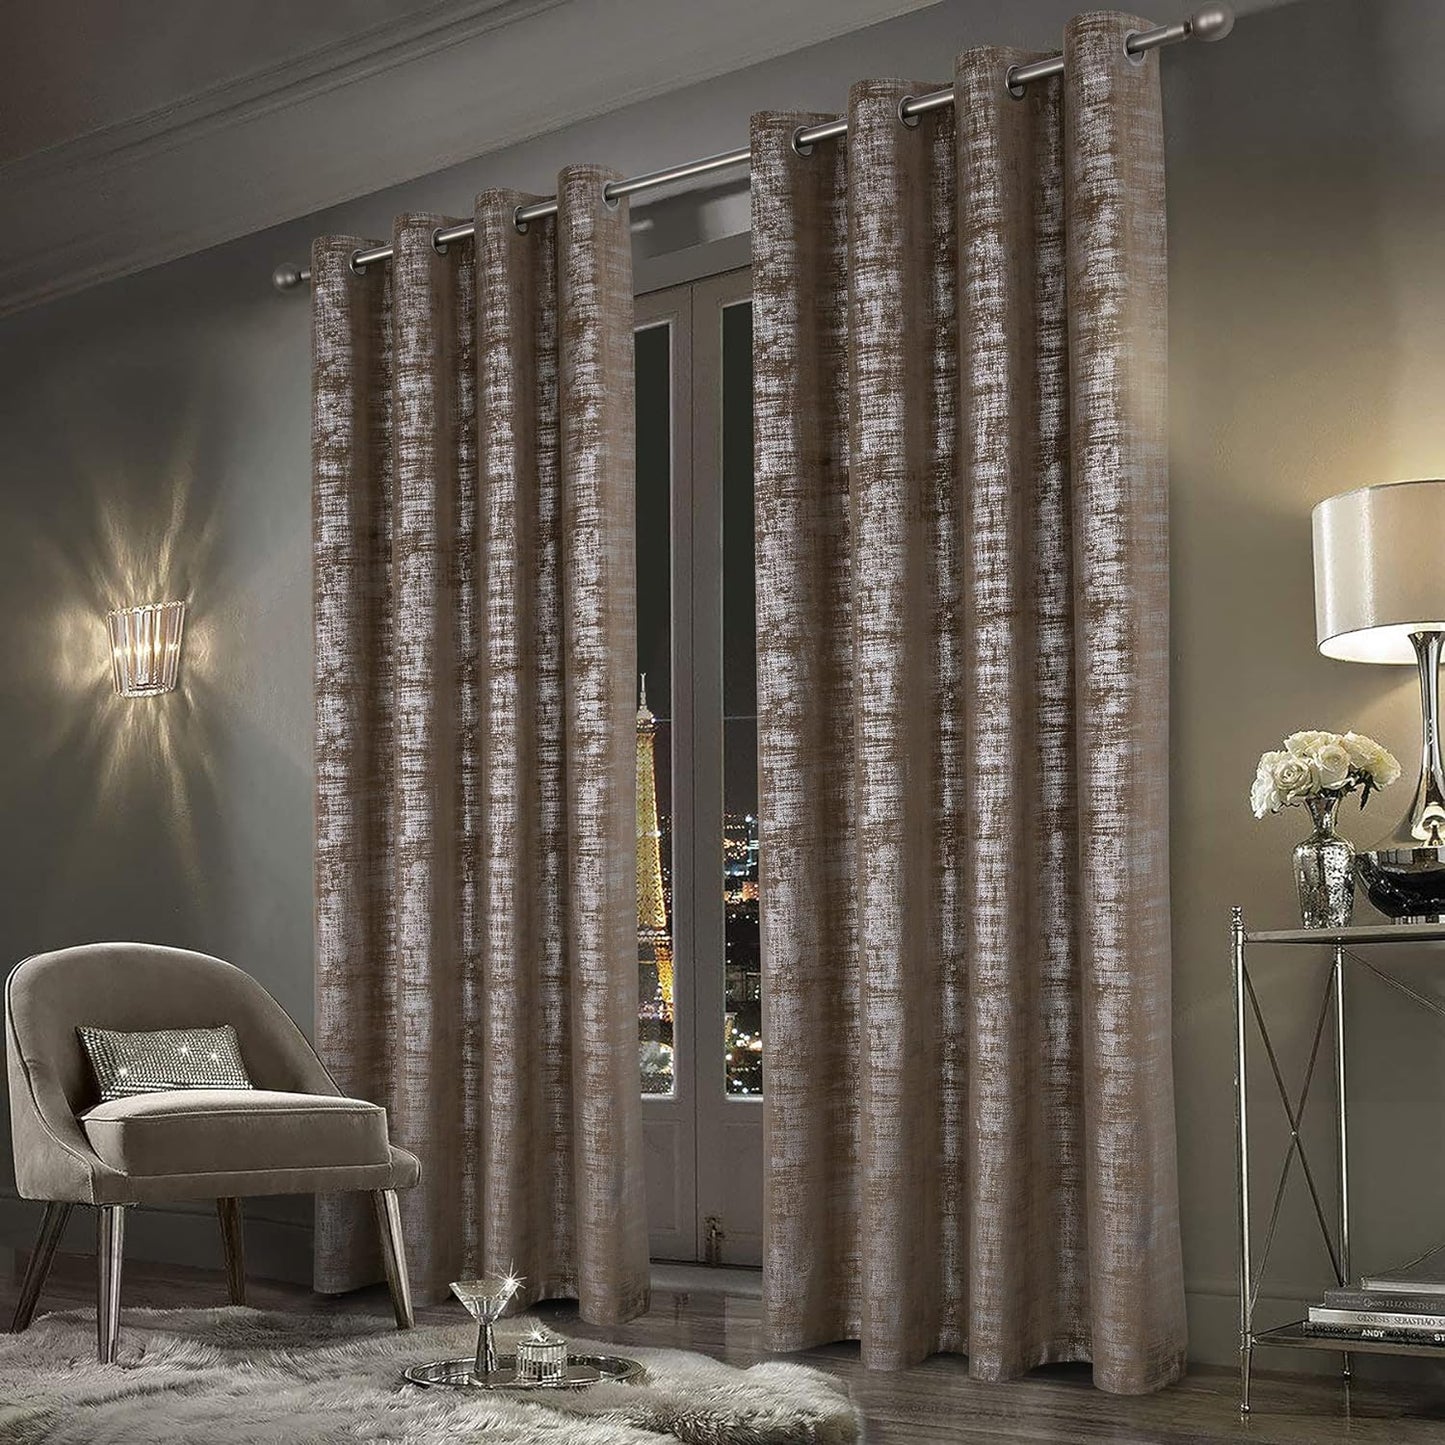 Always4U Soft Velvet Curtains 95 Inch Length Luxury Bedroom Curtains Gold Foil Print Window Curtains for Living Room 1 Panel White  always4u Mocha (Silver Print) 2 Panels: 52''W*95''L 